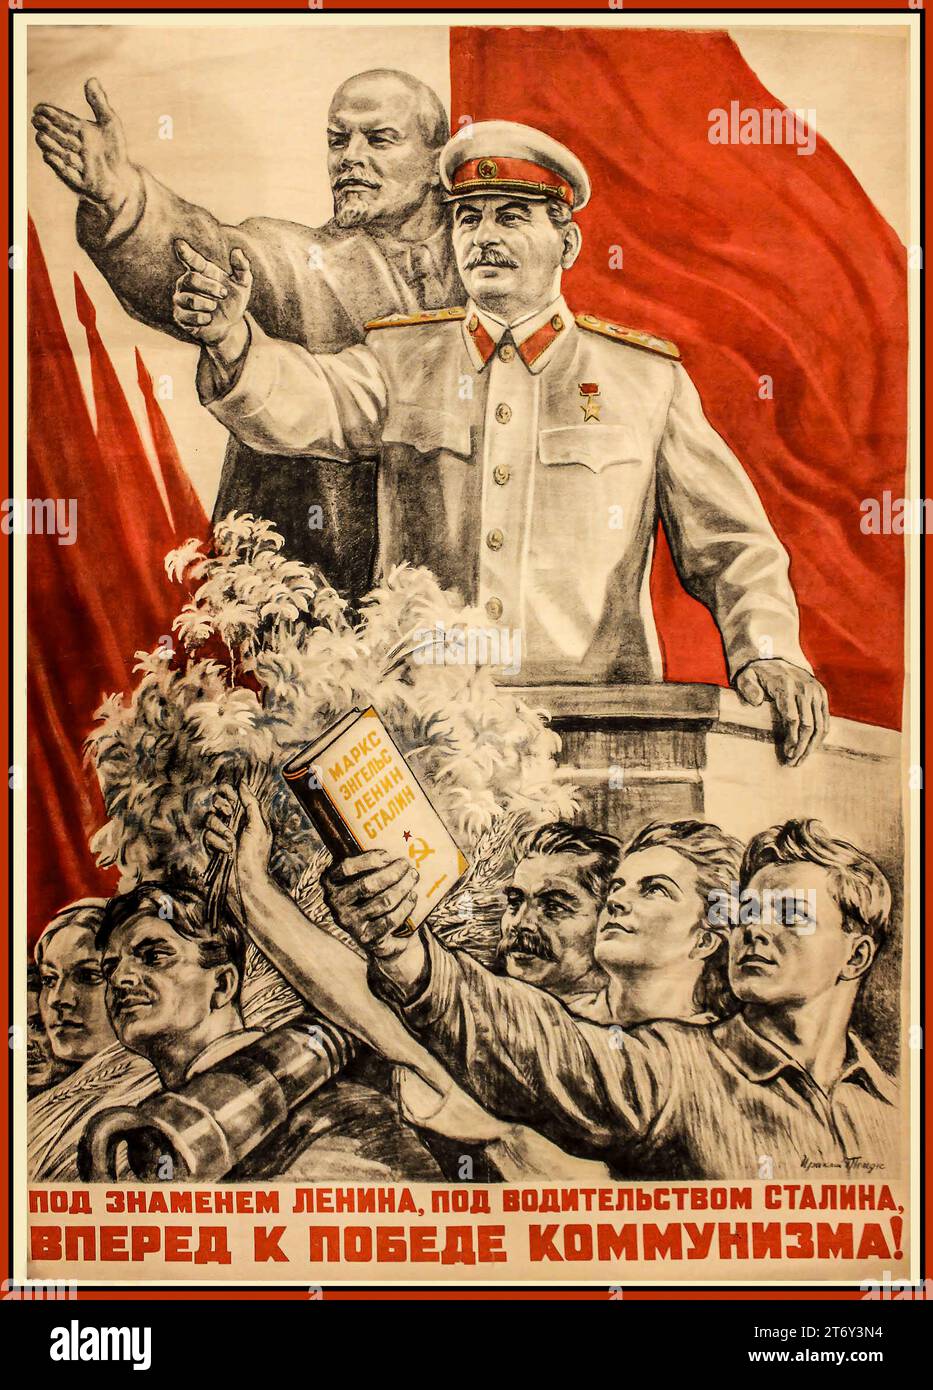 Soviet Russian USSR Propaganda Poster featuring Stalin and Lenin. The caption reads 'under the banner of Lenin, under the leadership of Stalin BEFORE THE VICTORY OF COMMUNISM ! Under the banner of Lenin, under the leadership of Stalin – to victory of communism in our country! - Ivan Mikhailovich Shagin Stock Photo